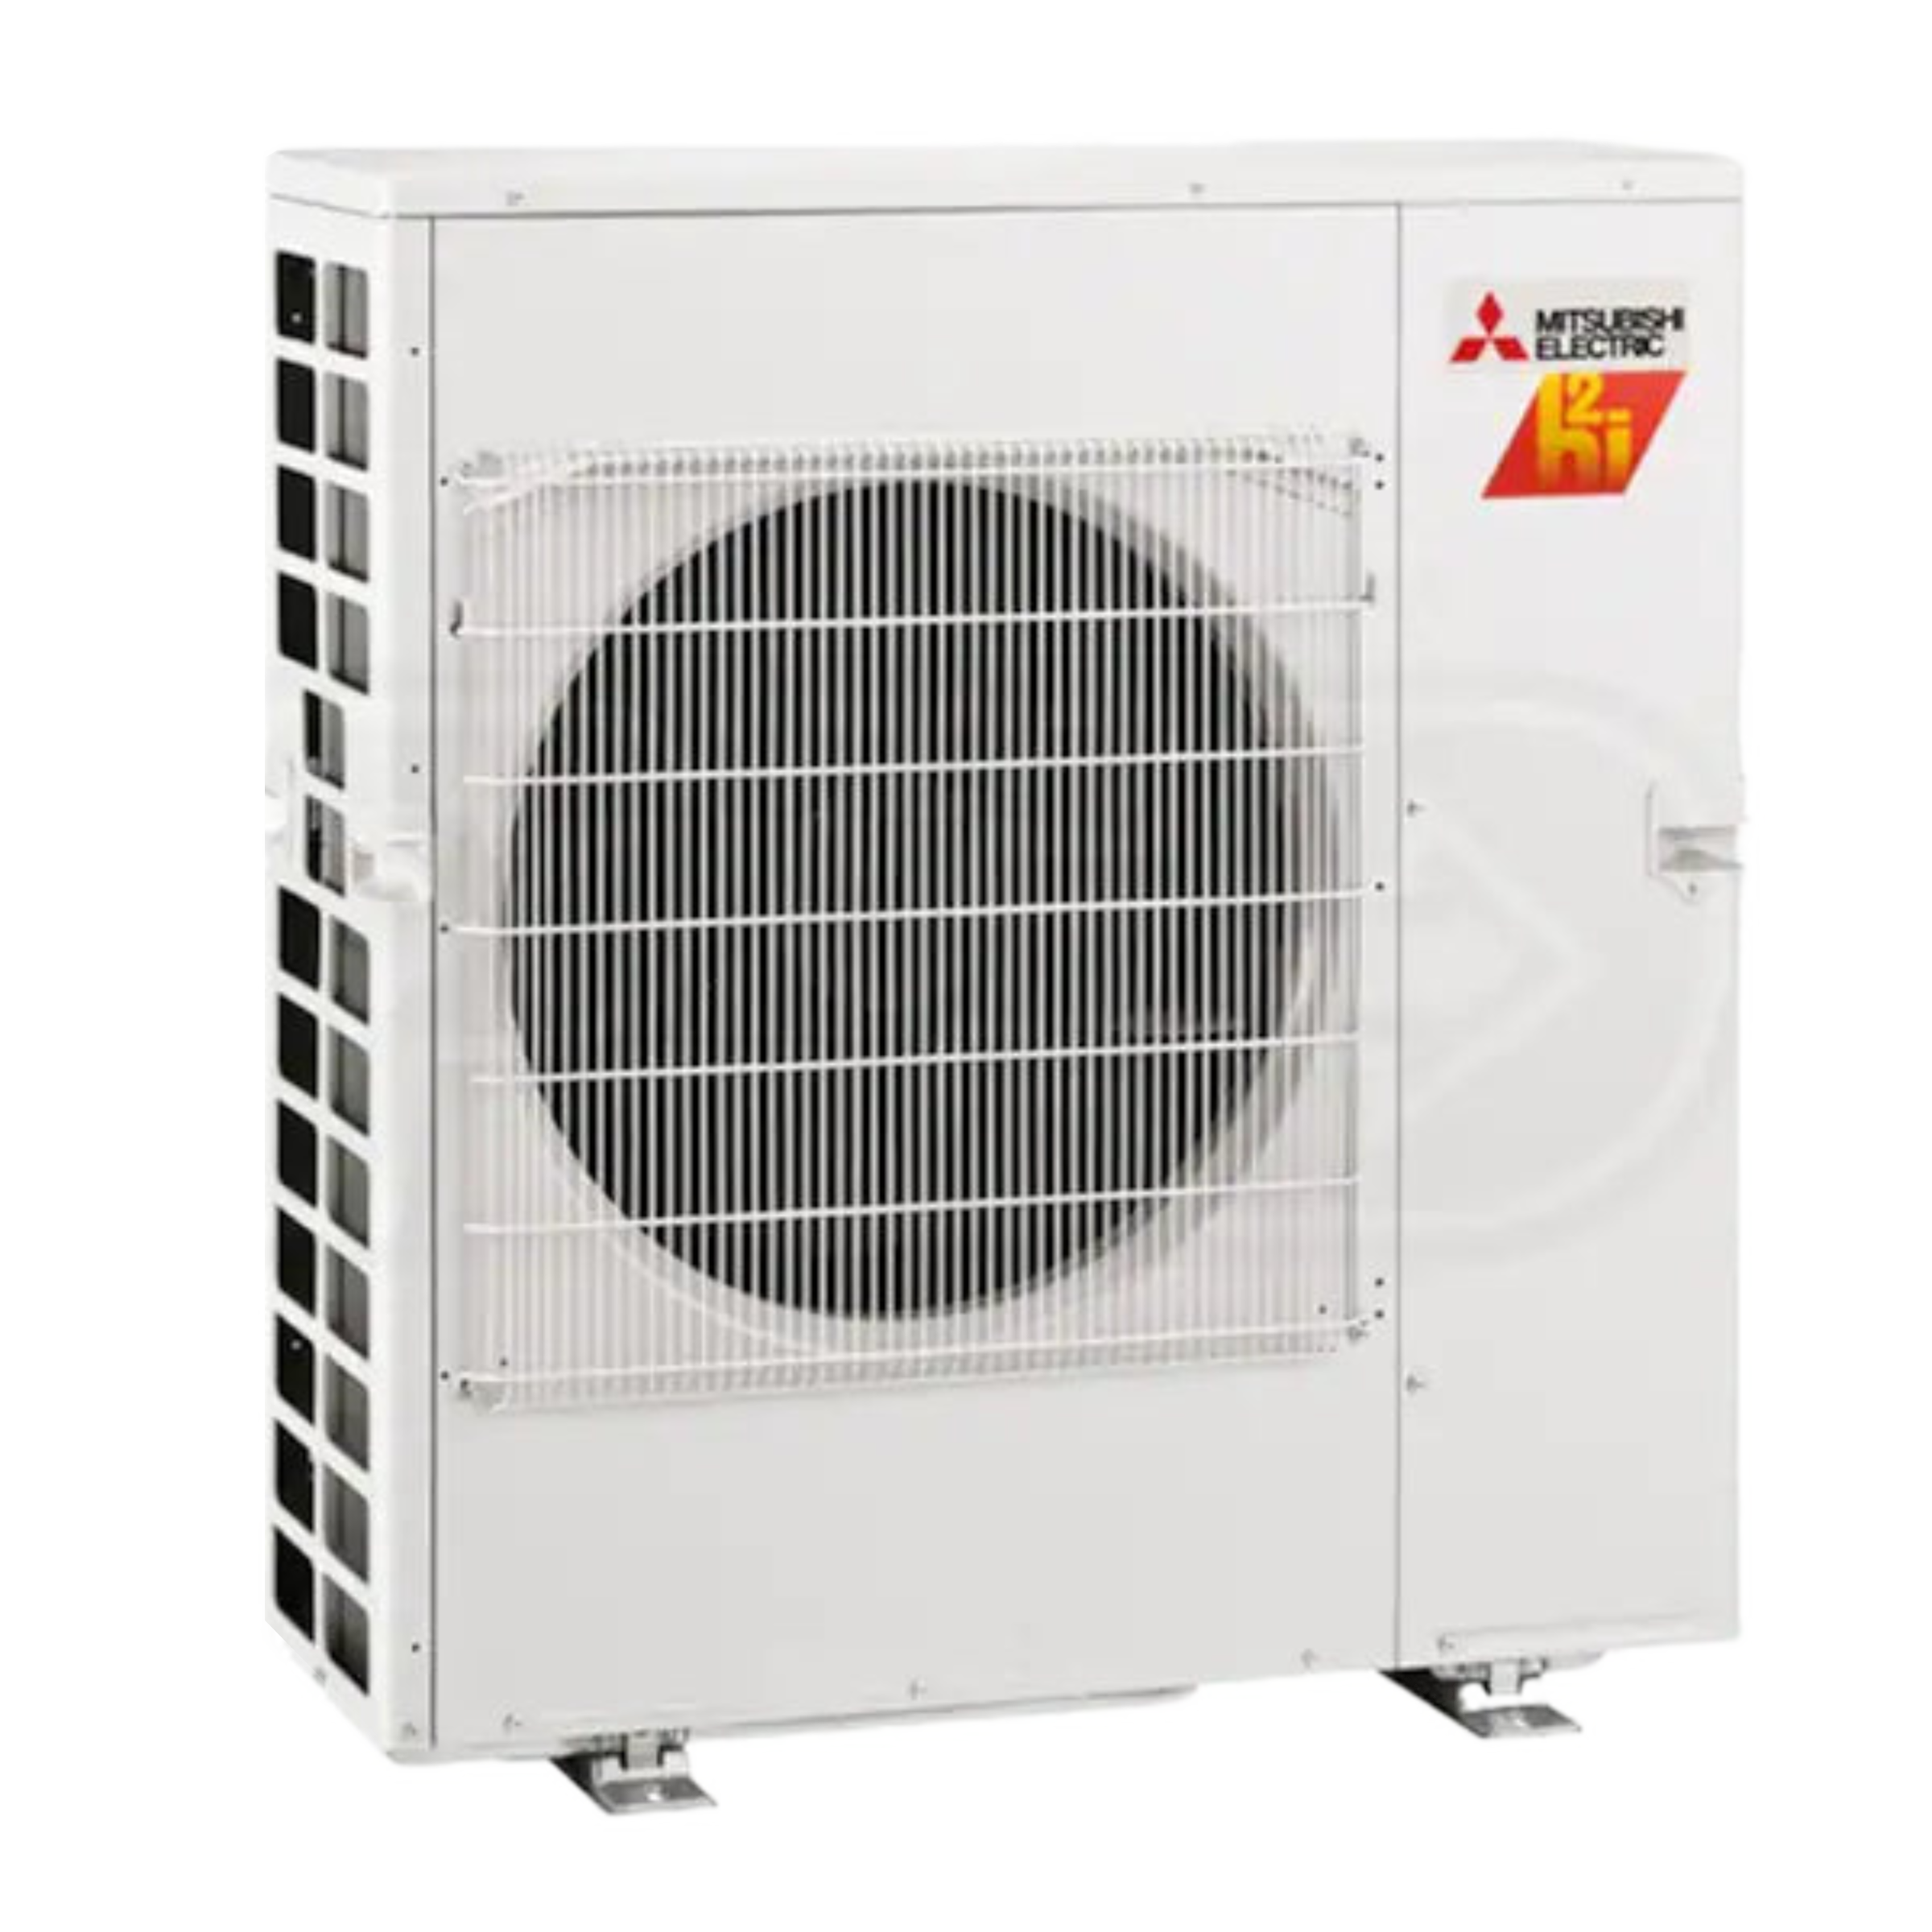 Mitsubishi 2-Zone 17 SEER Mini Split Ductless Heat pump Air Conditioner Model MXZ-2C20NAHZ2 22000 BTU for Outdoor Unit with 2 Indoor units, R-410A